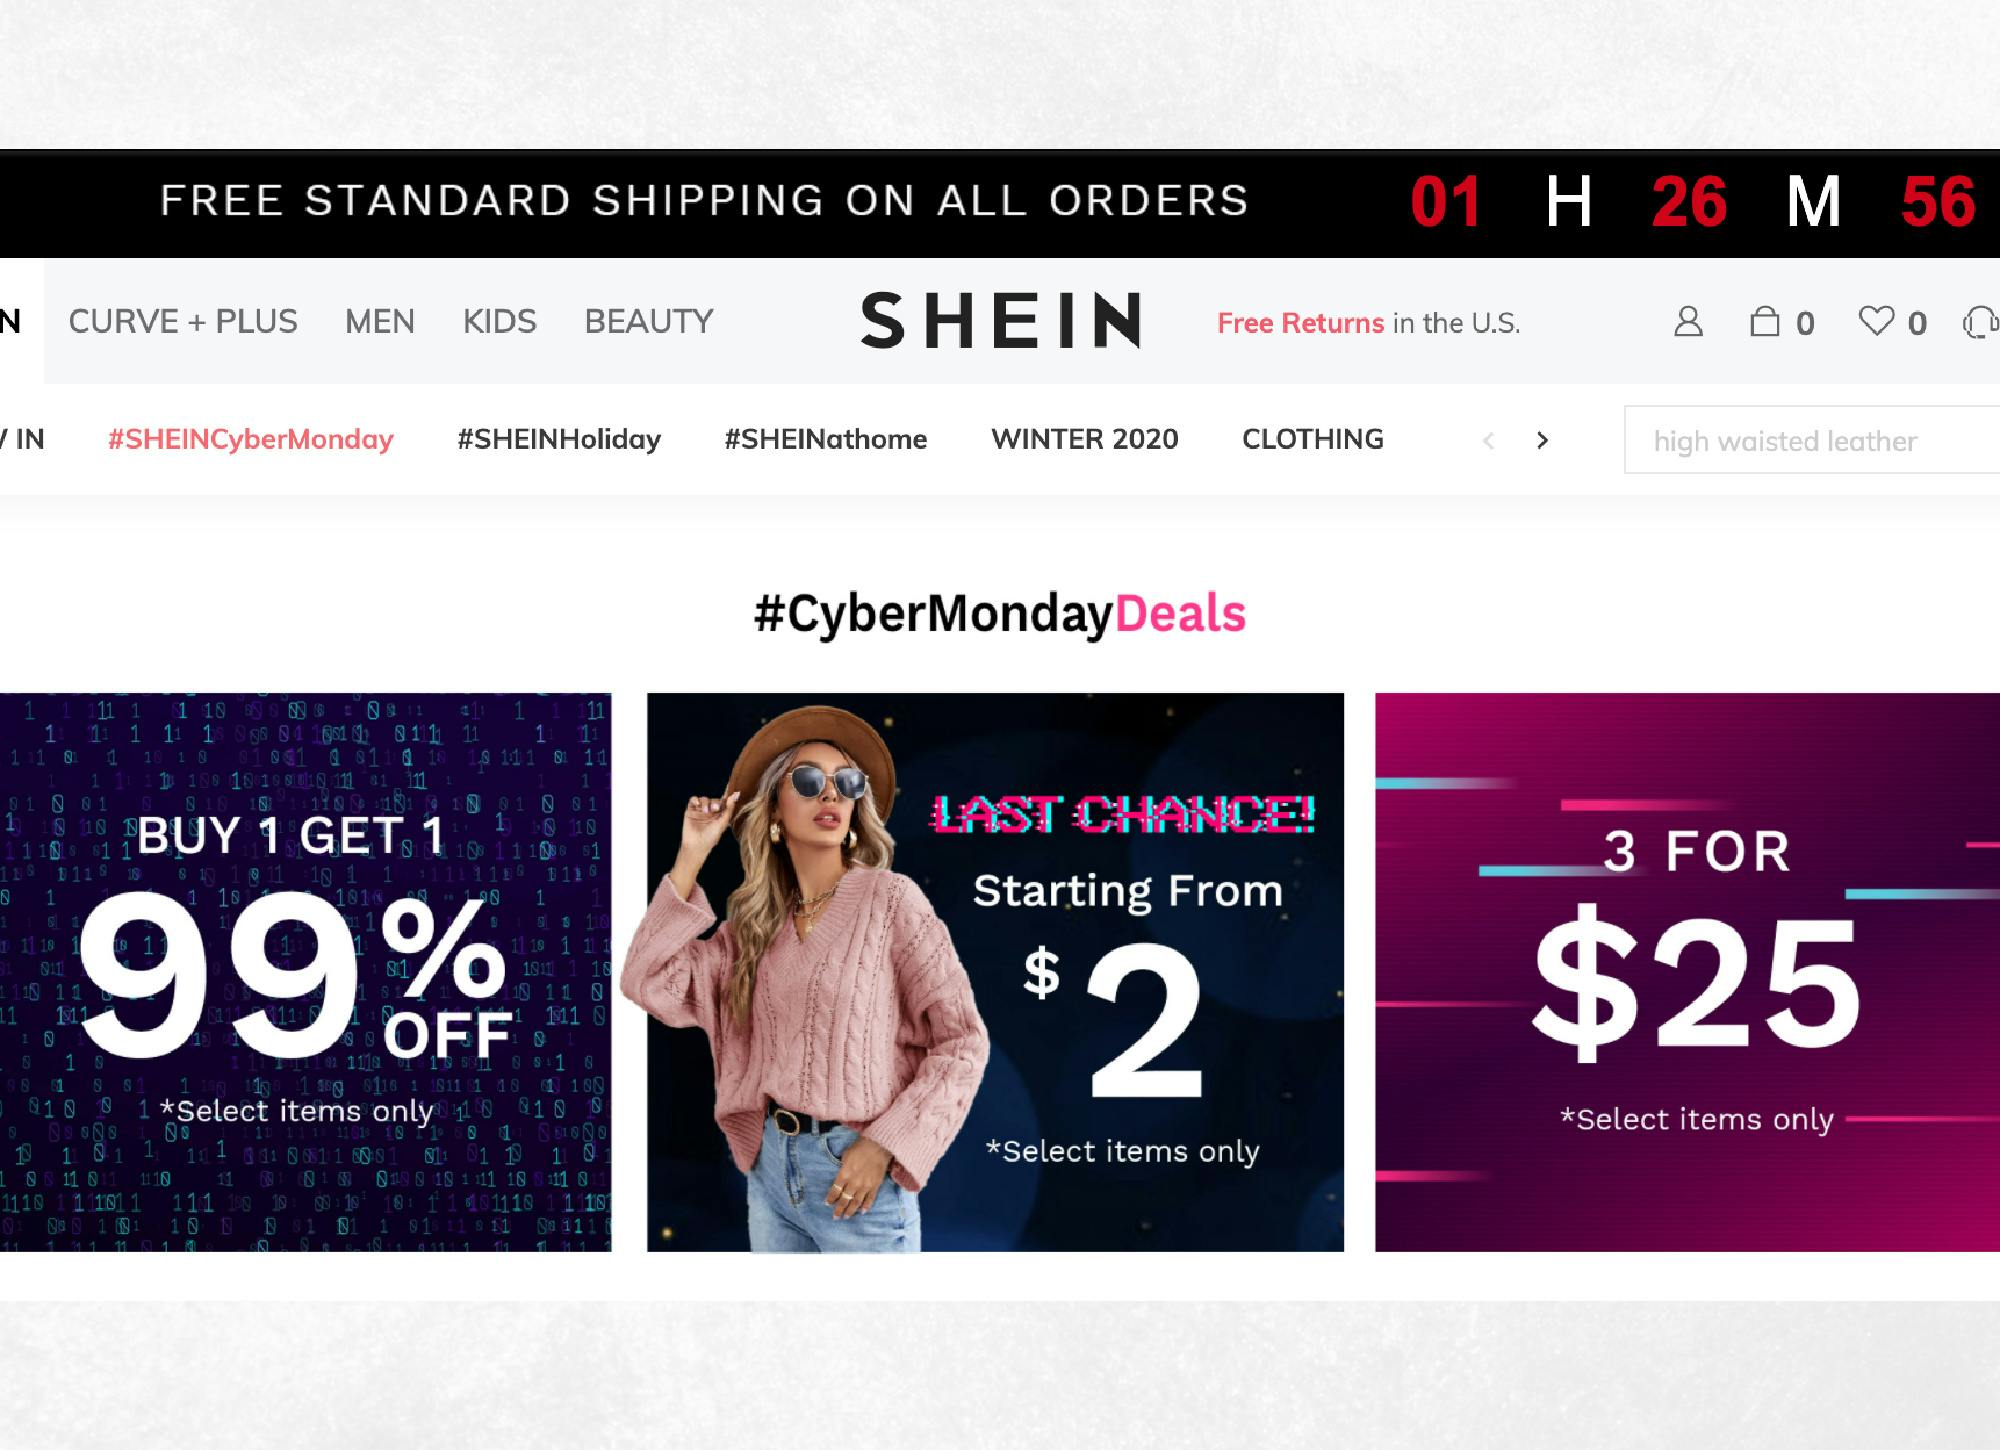 shein homepage screenshot of cyber monday 2020 deals like buy one get one 99% off